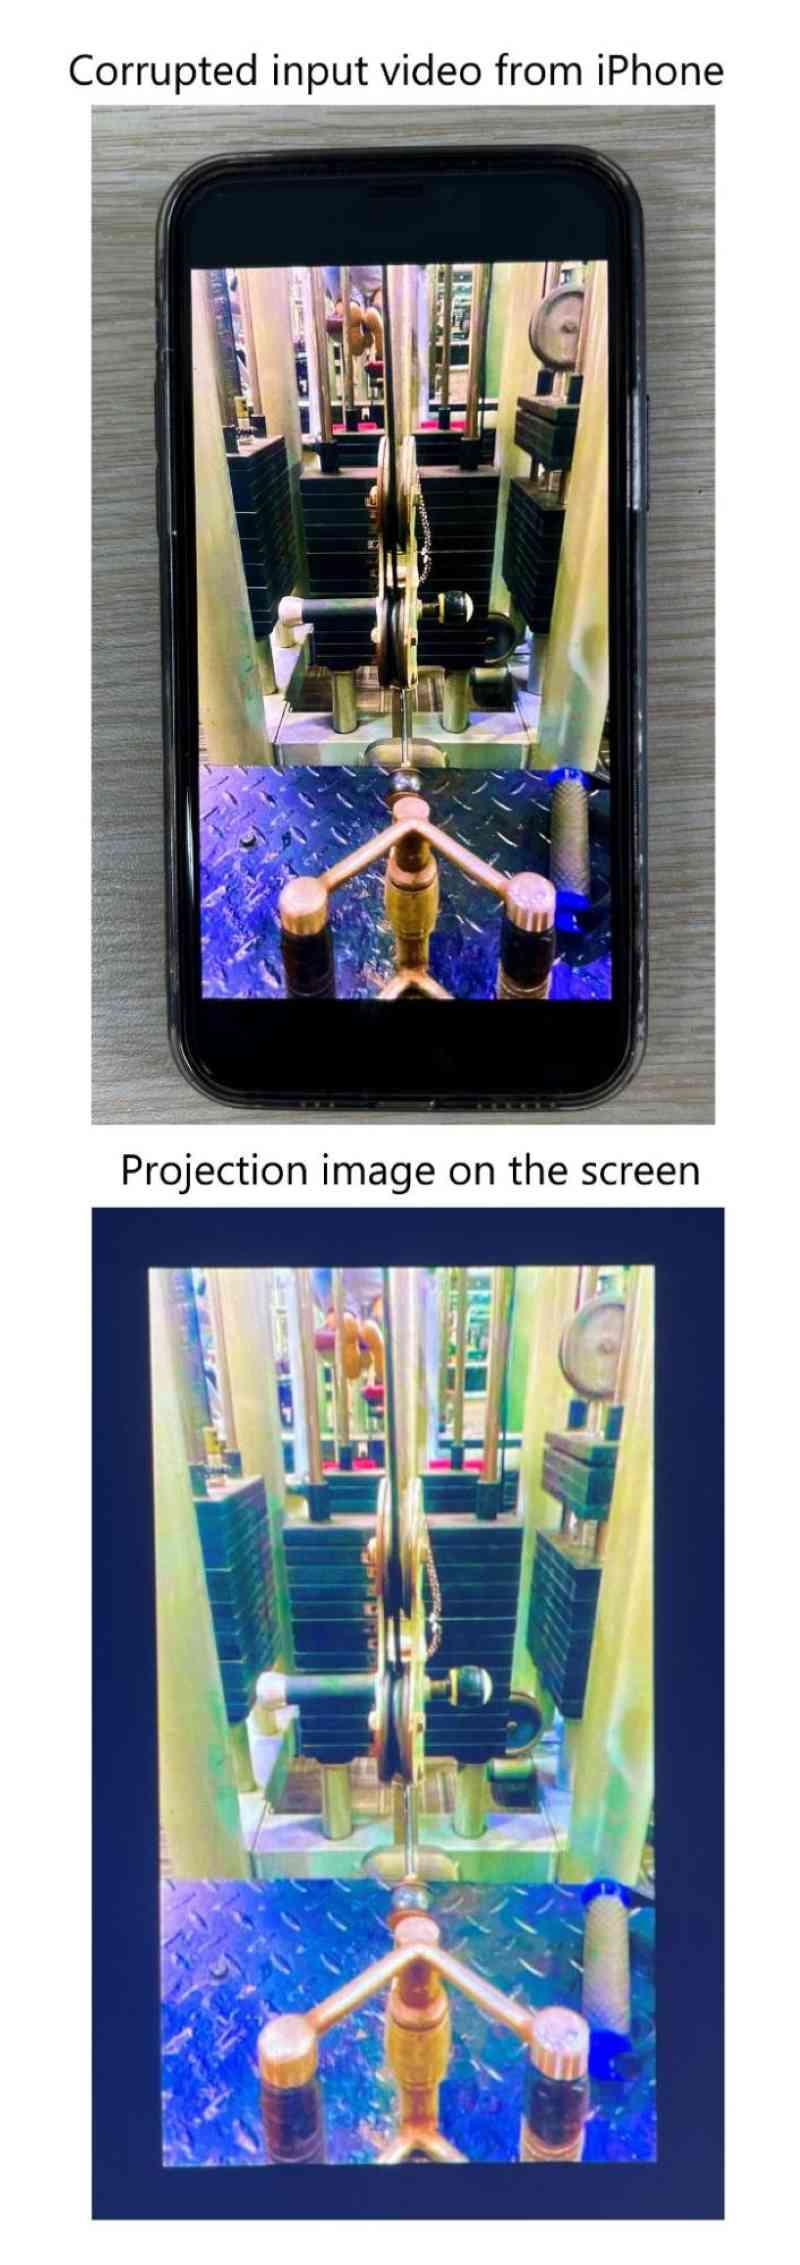 Demonstration of corrupted input video from iPhone and projection image on the screen